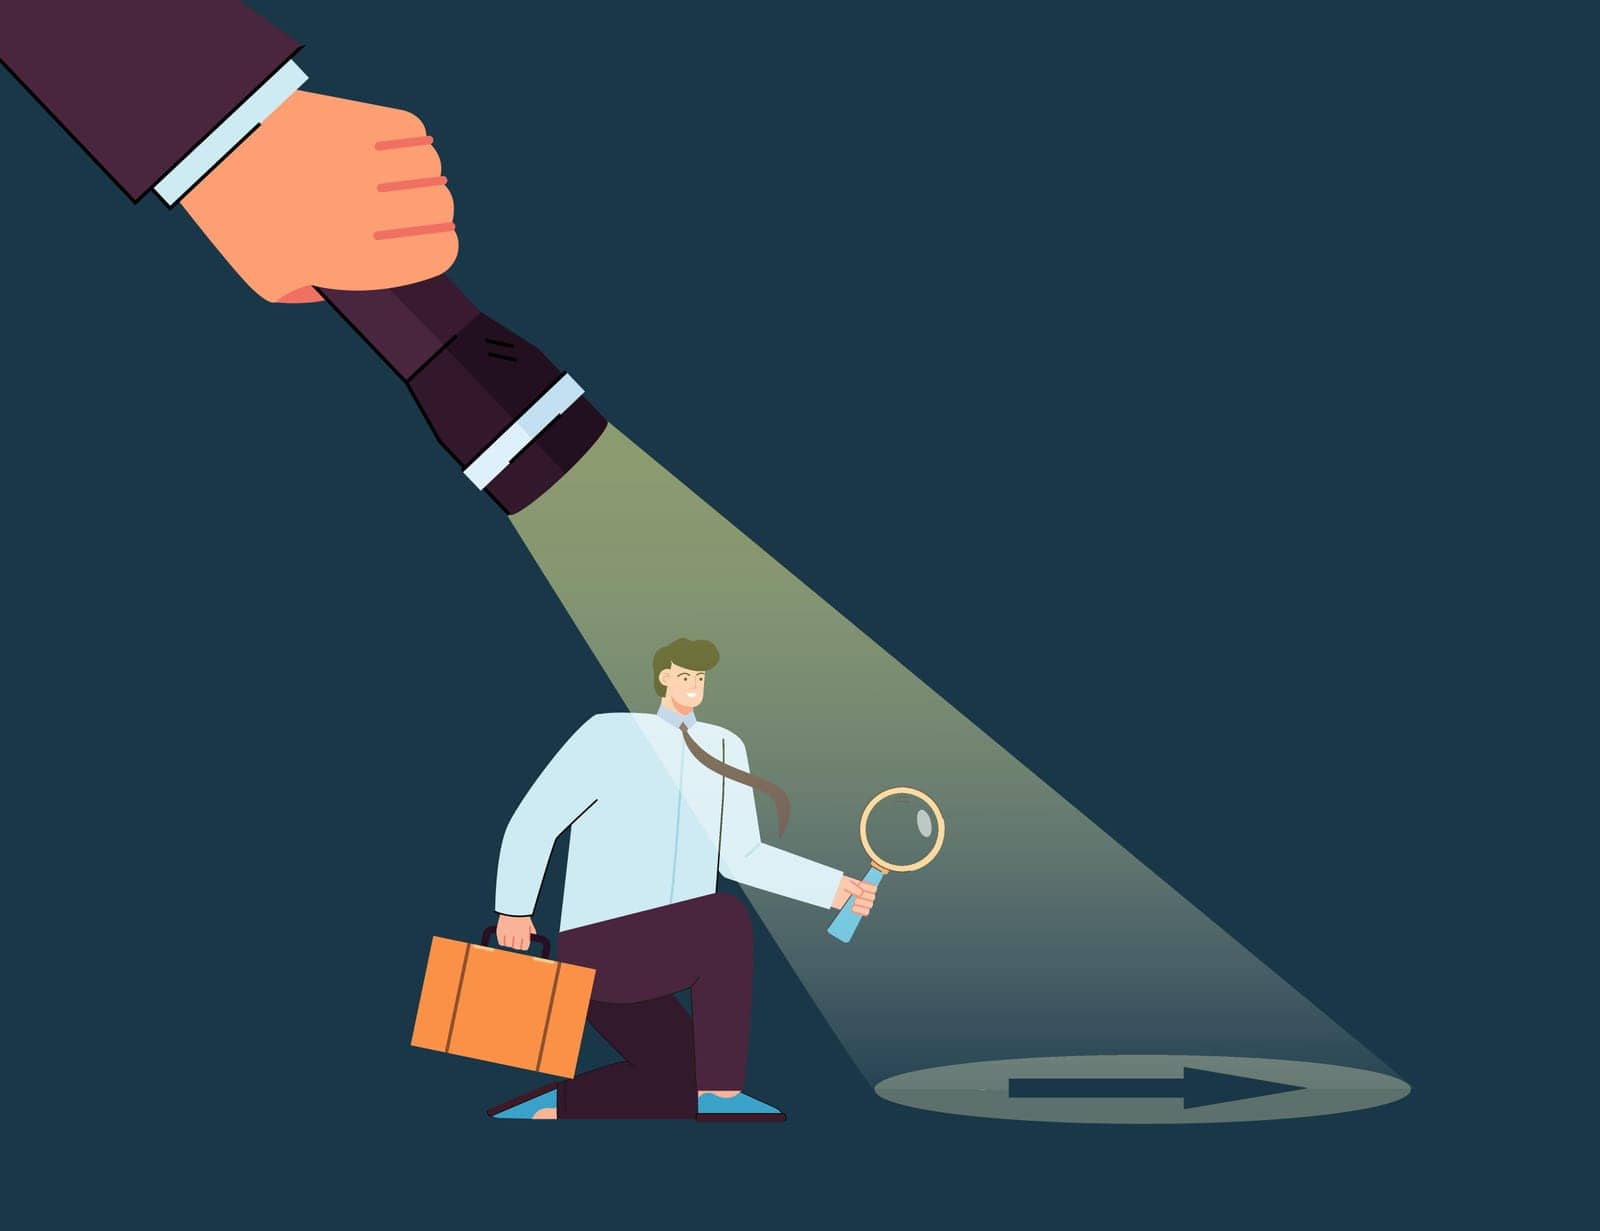 Hand with flashlight guiding businessman in right direction. Assistance for tiny business person on way forward flat vector illustration. Leadership, support in career achievement, guidance concept